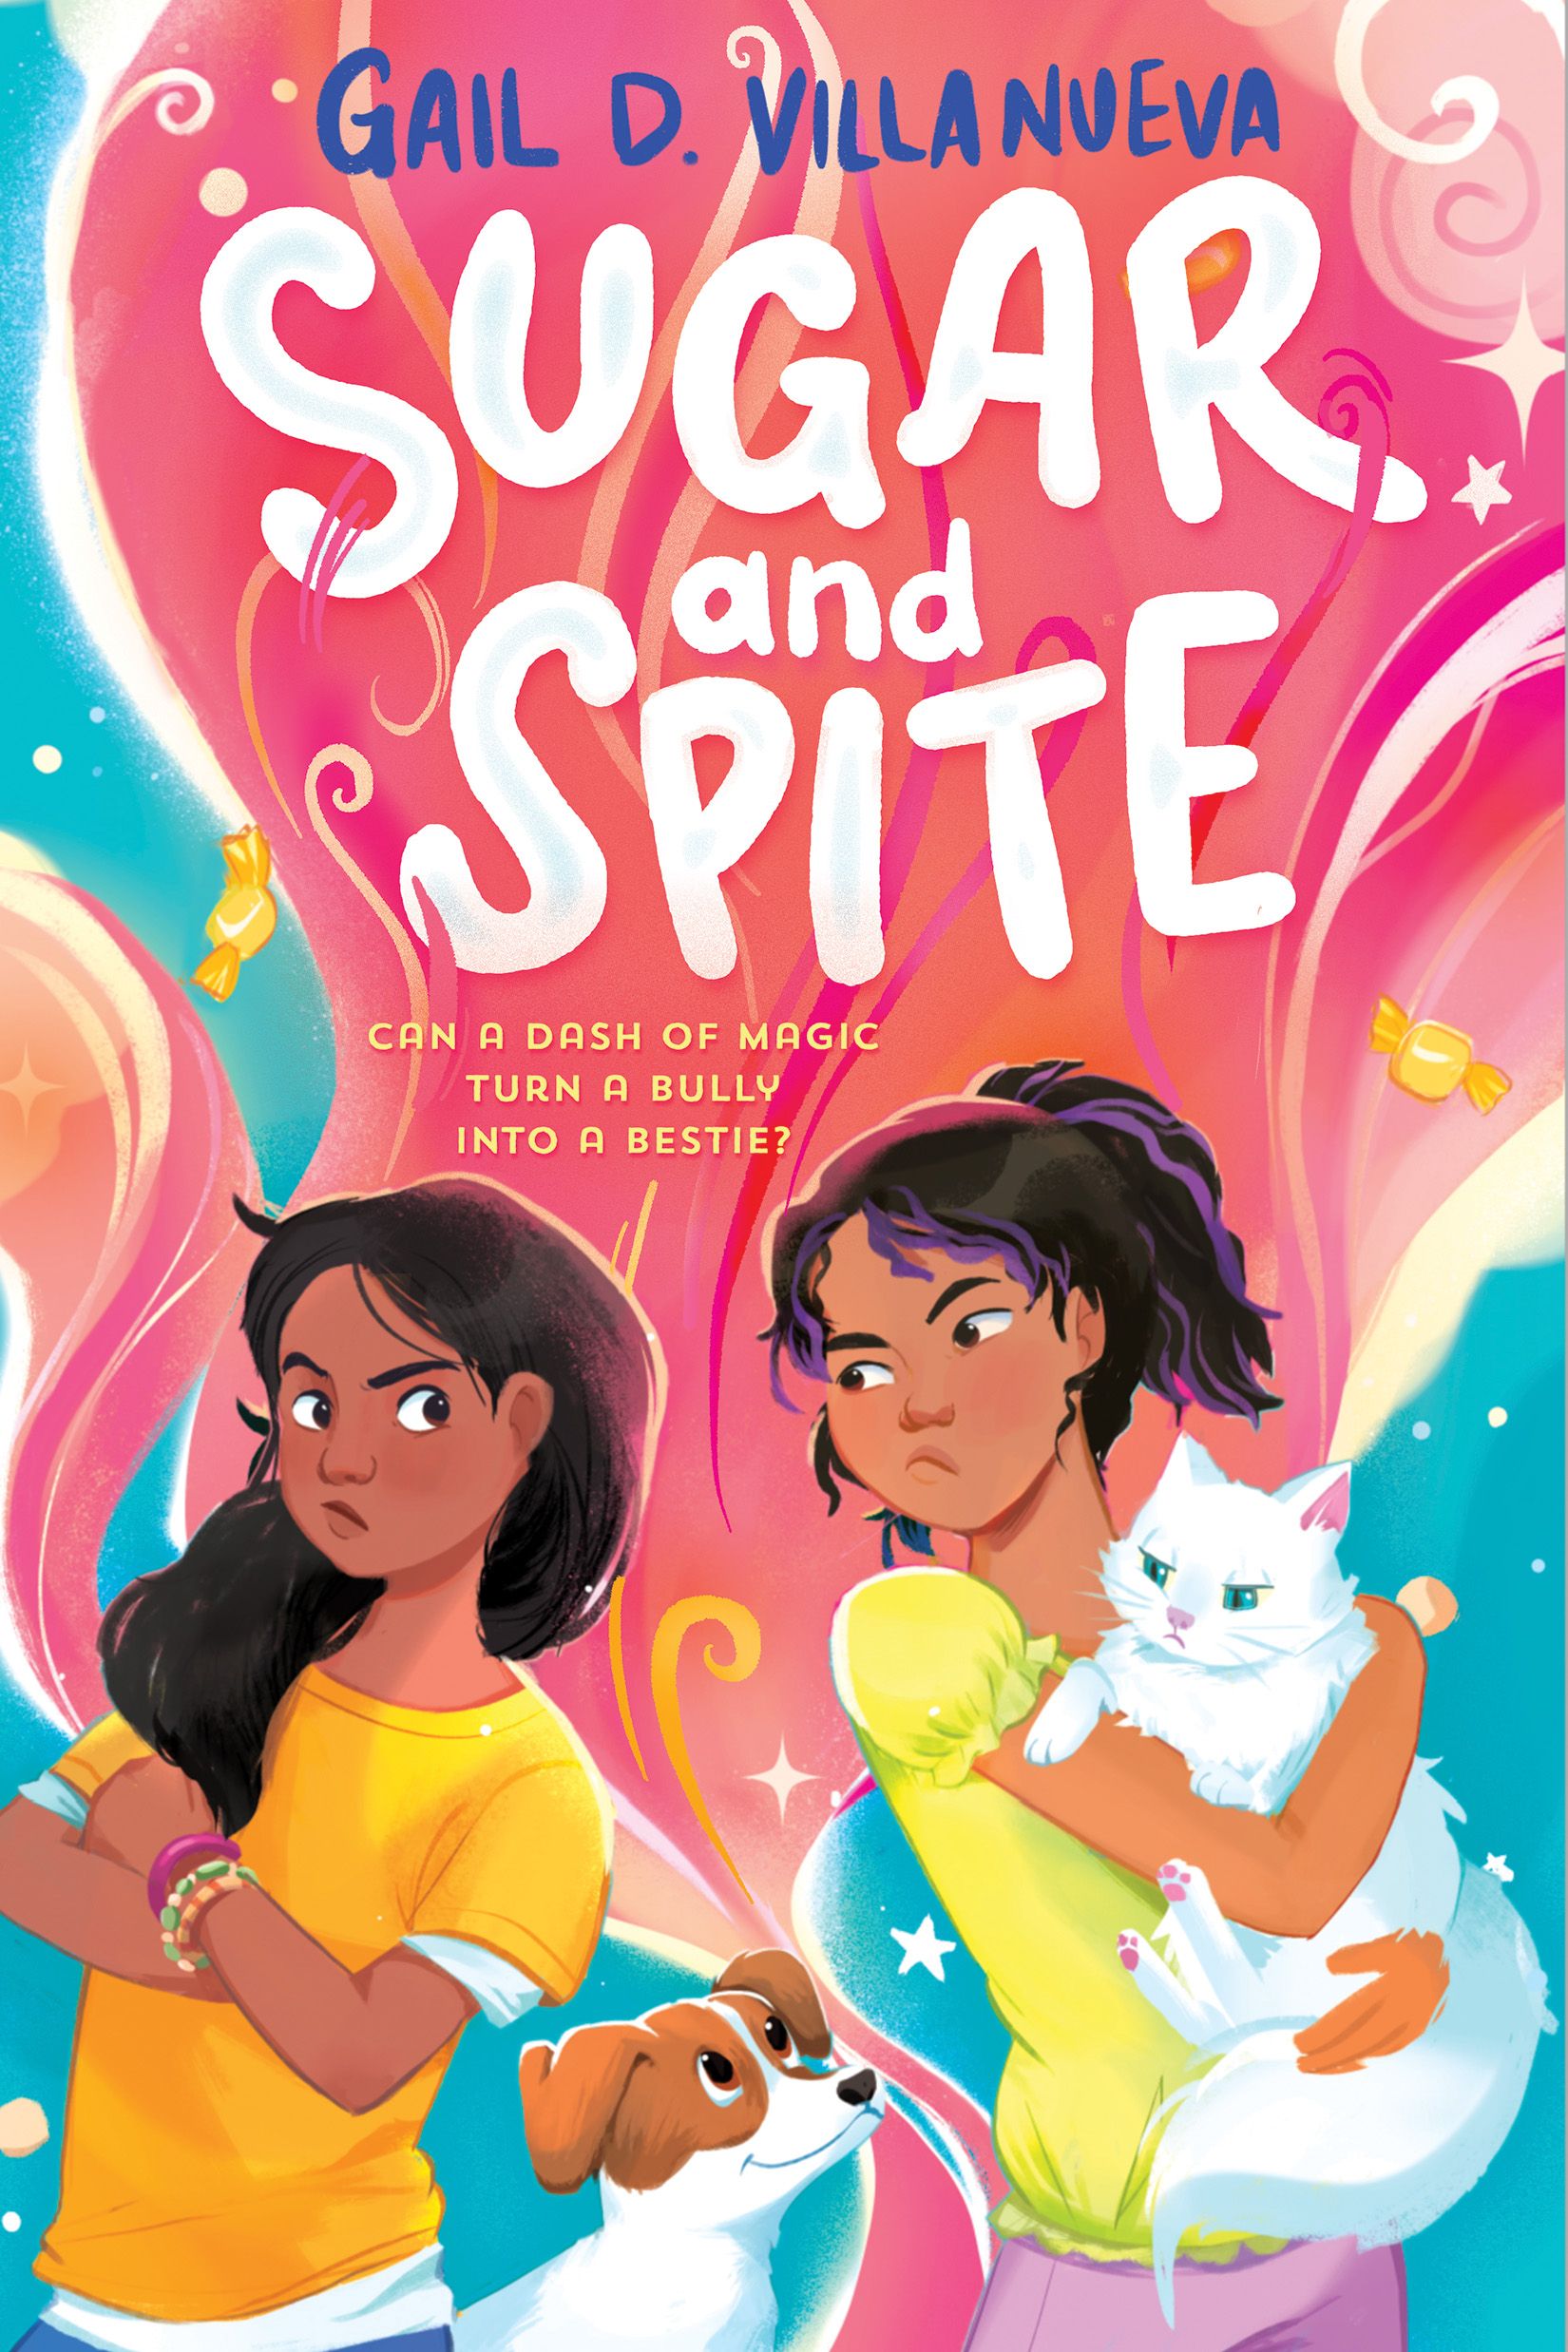 12 New Releases With Asian Representation on the Cover in 2021 - 98